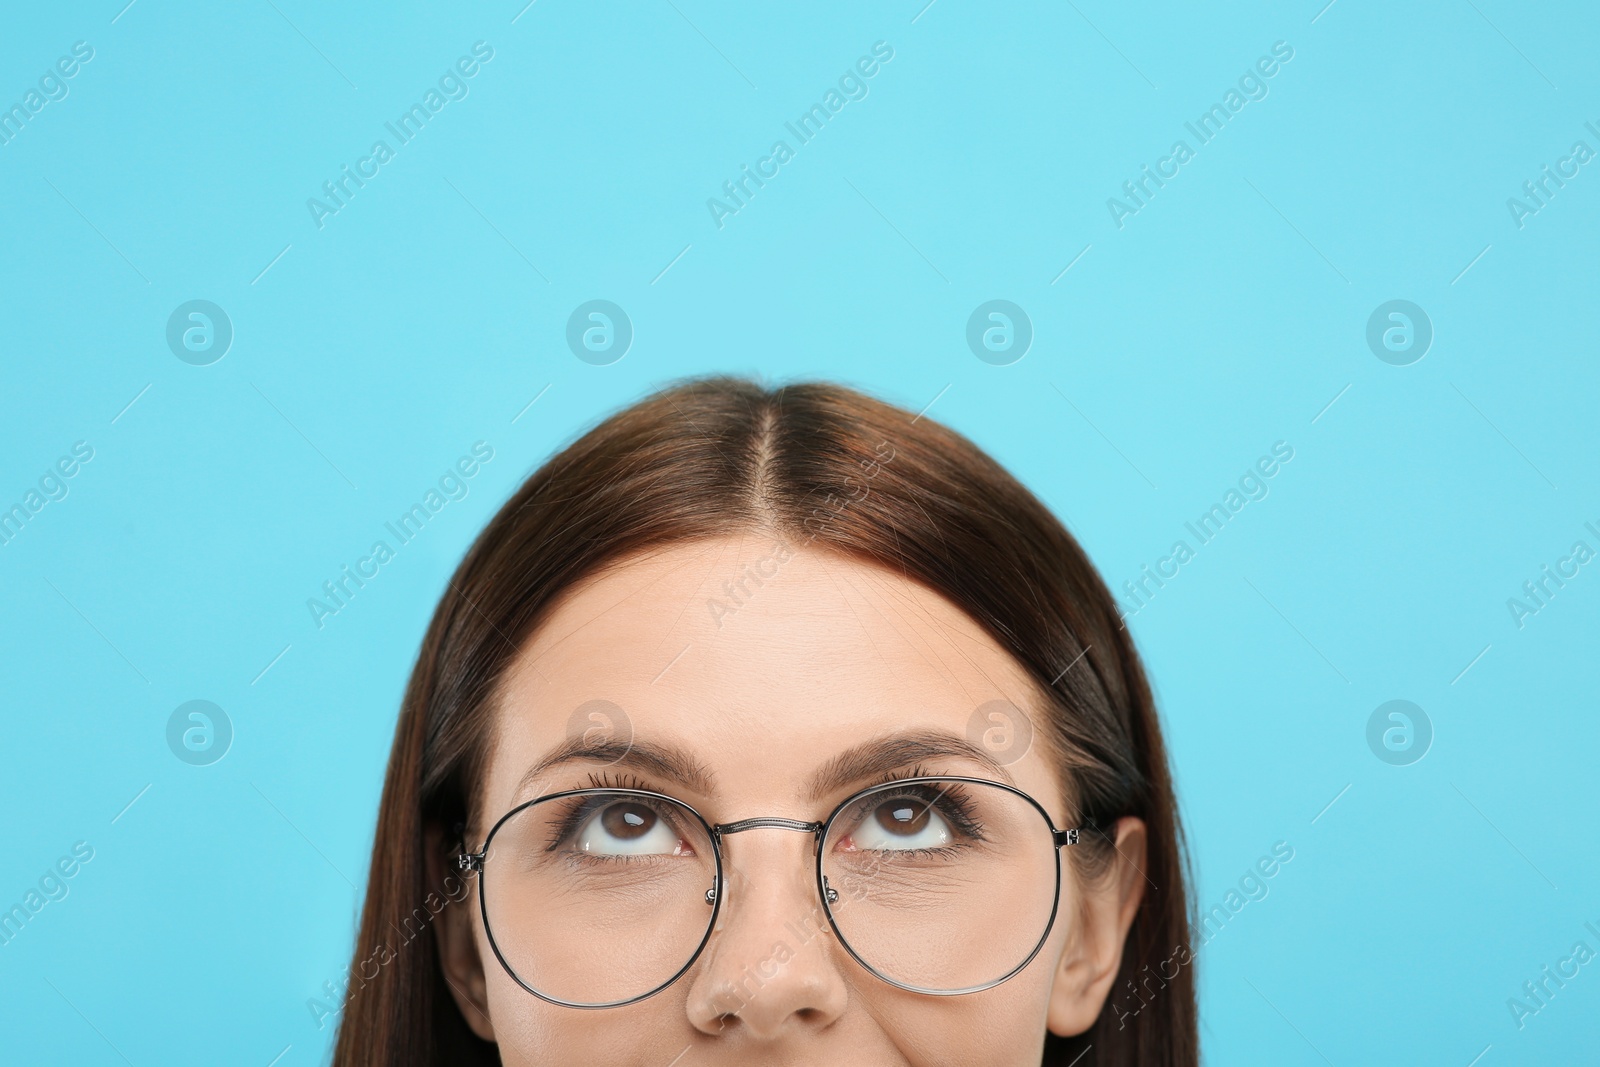 Photo of Woman in stylish eyeglasses looking up on light blue background, closeup